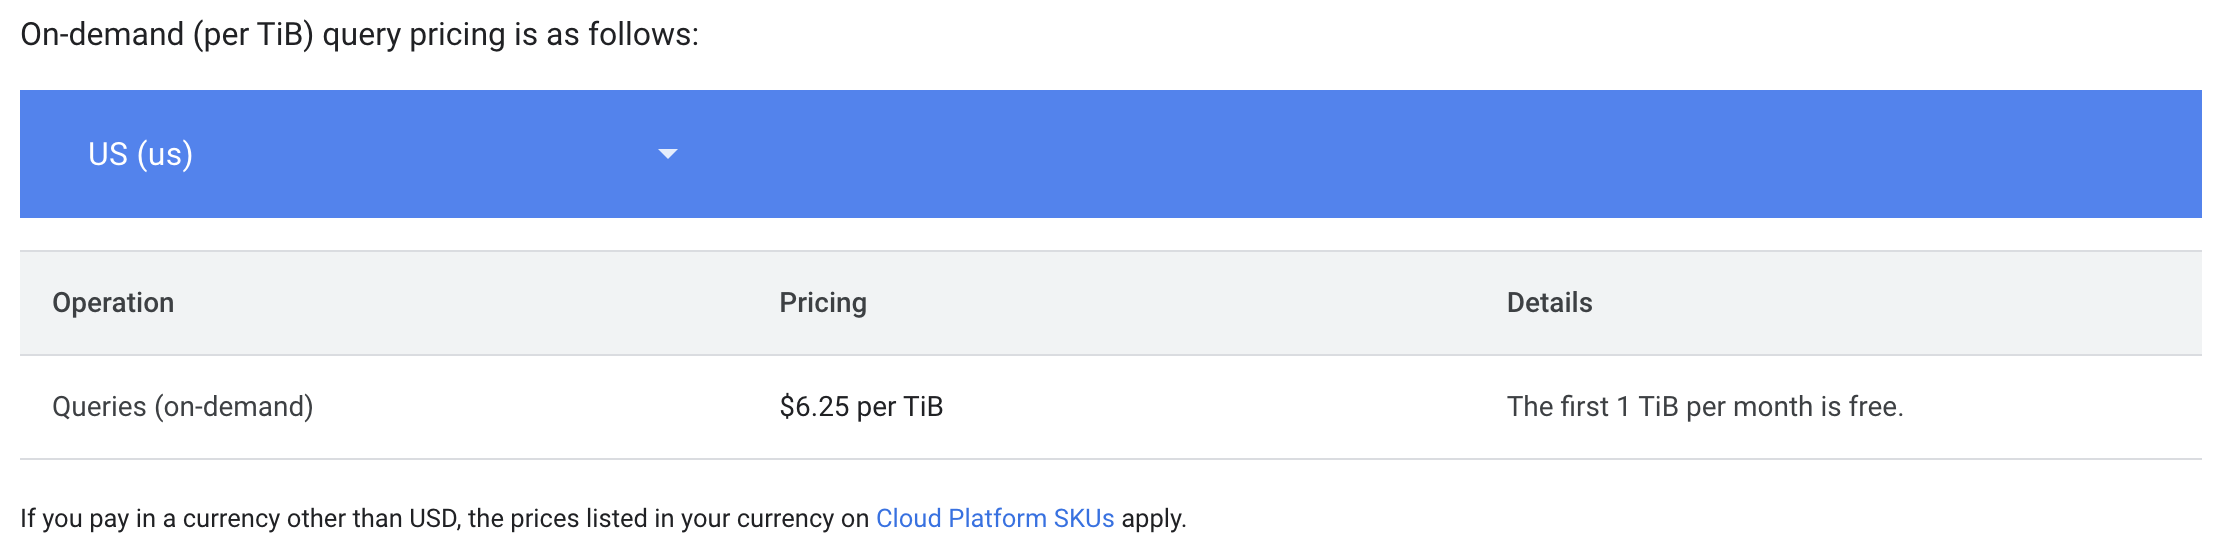 on-demand query pricing from Google for BigQuery